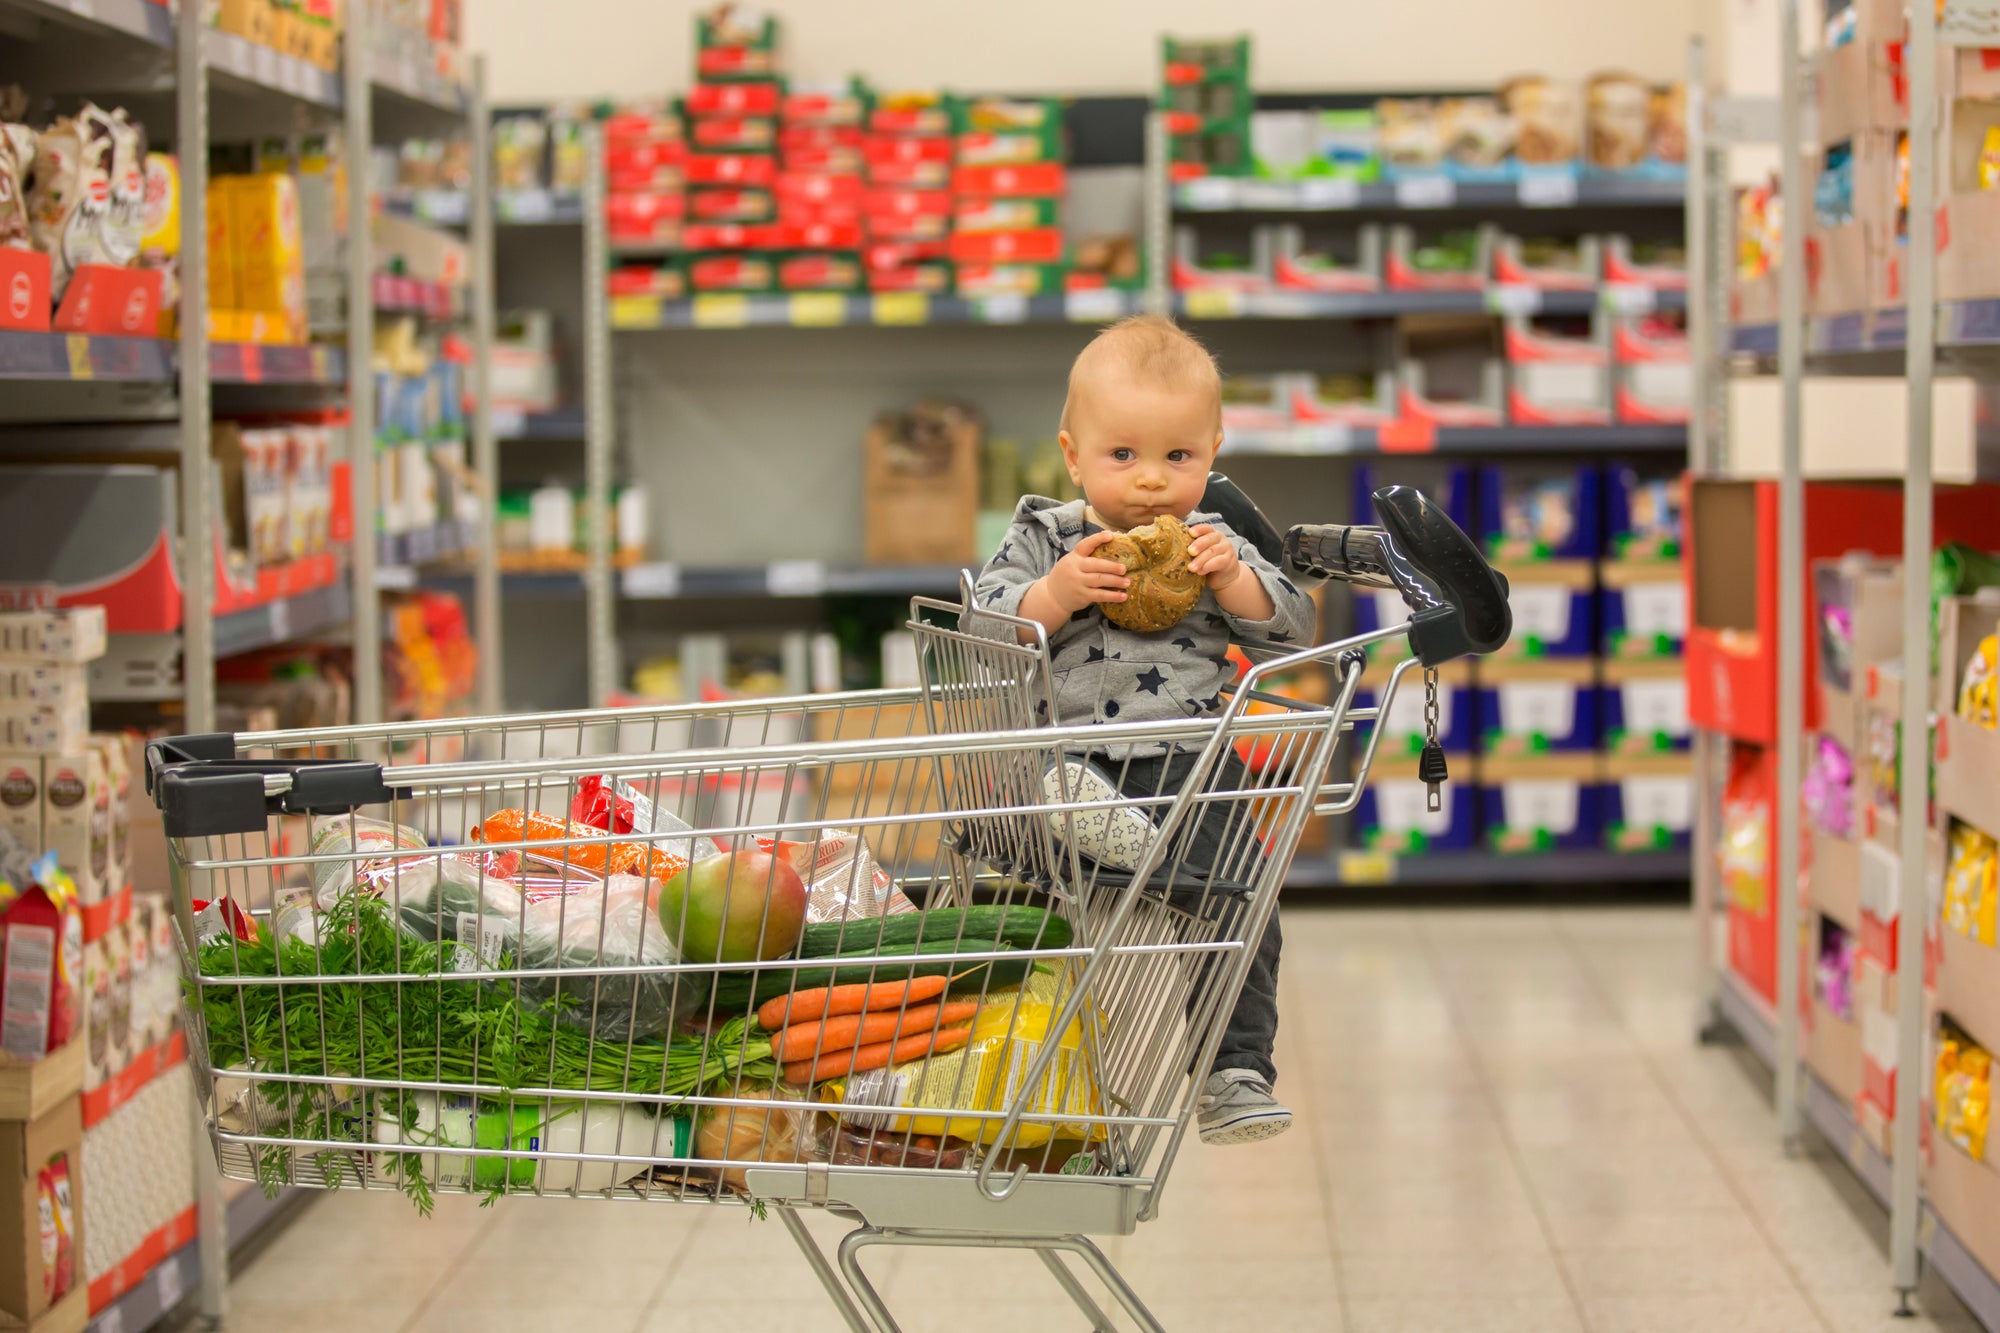 When Can You Put A Baby In A Shopping Cart?